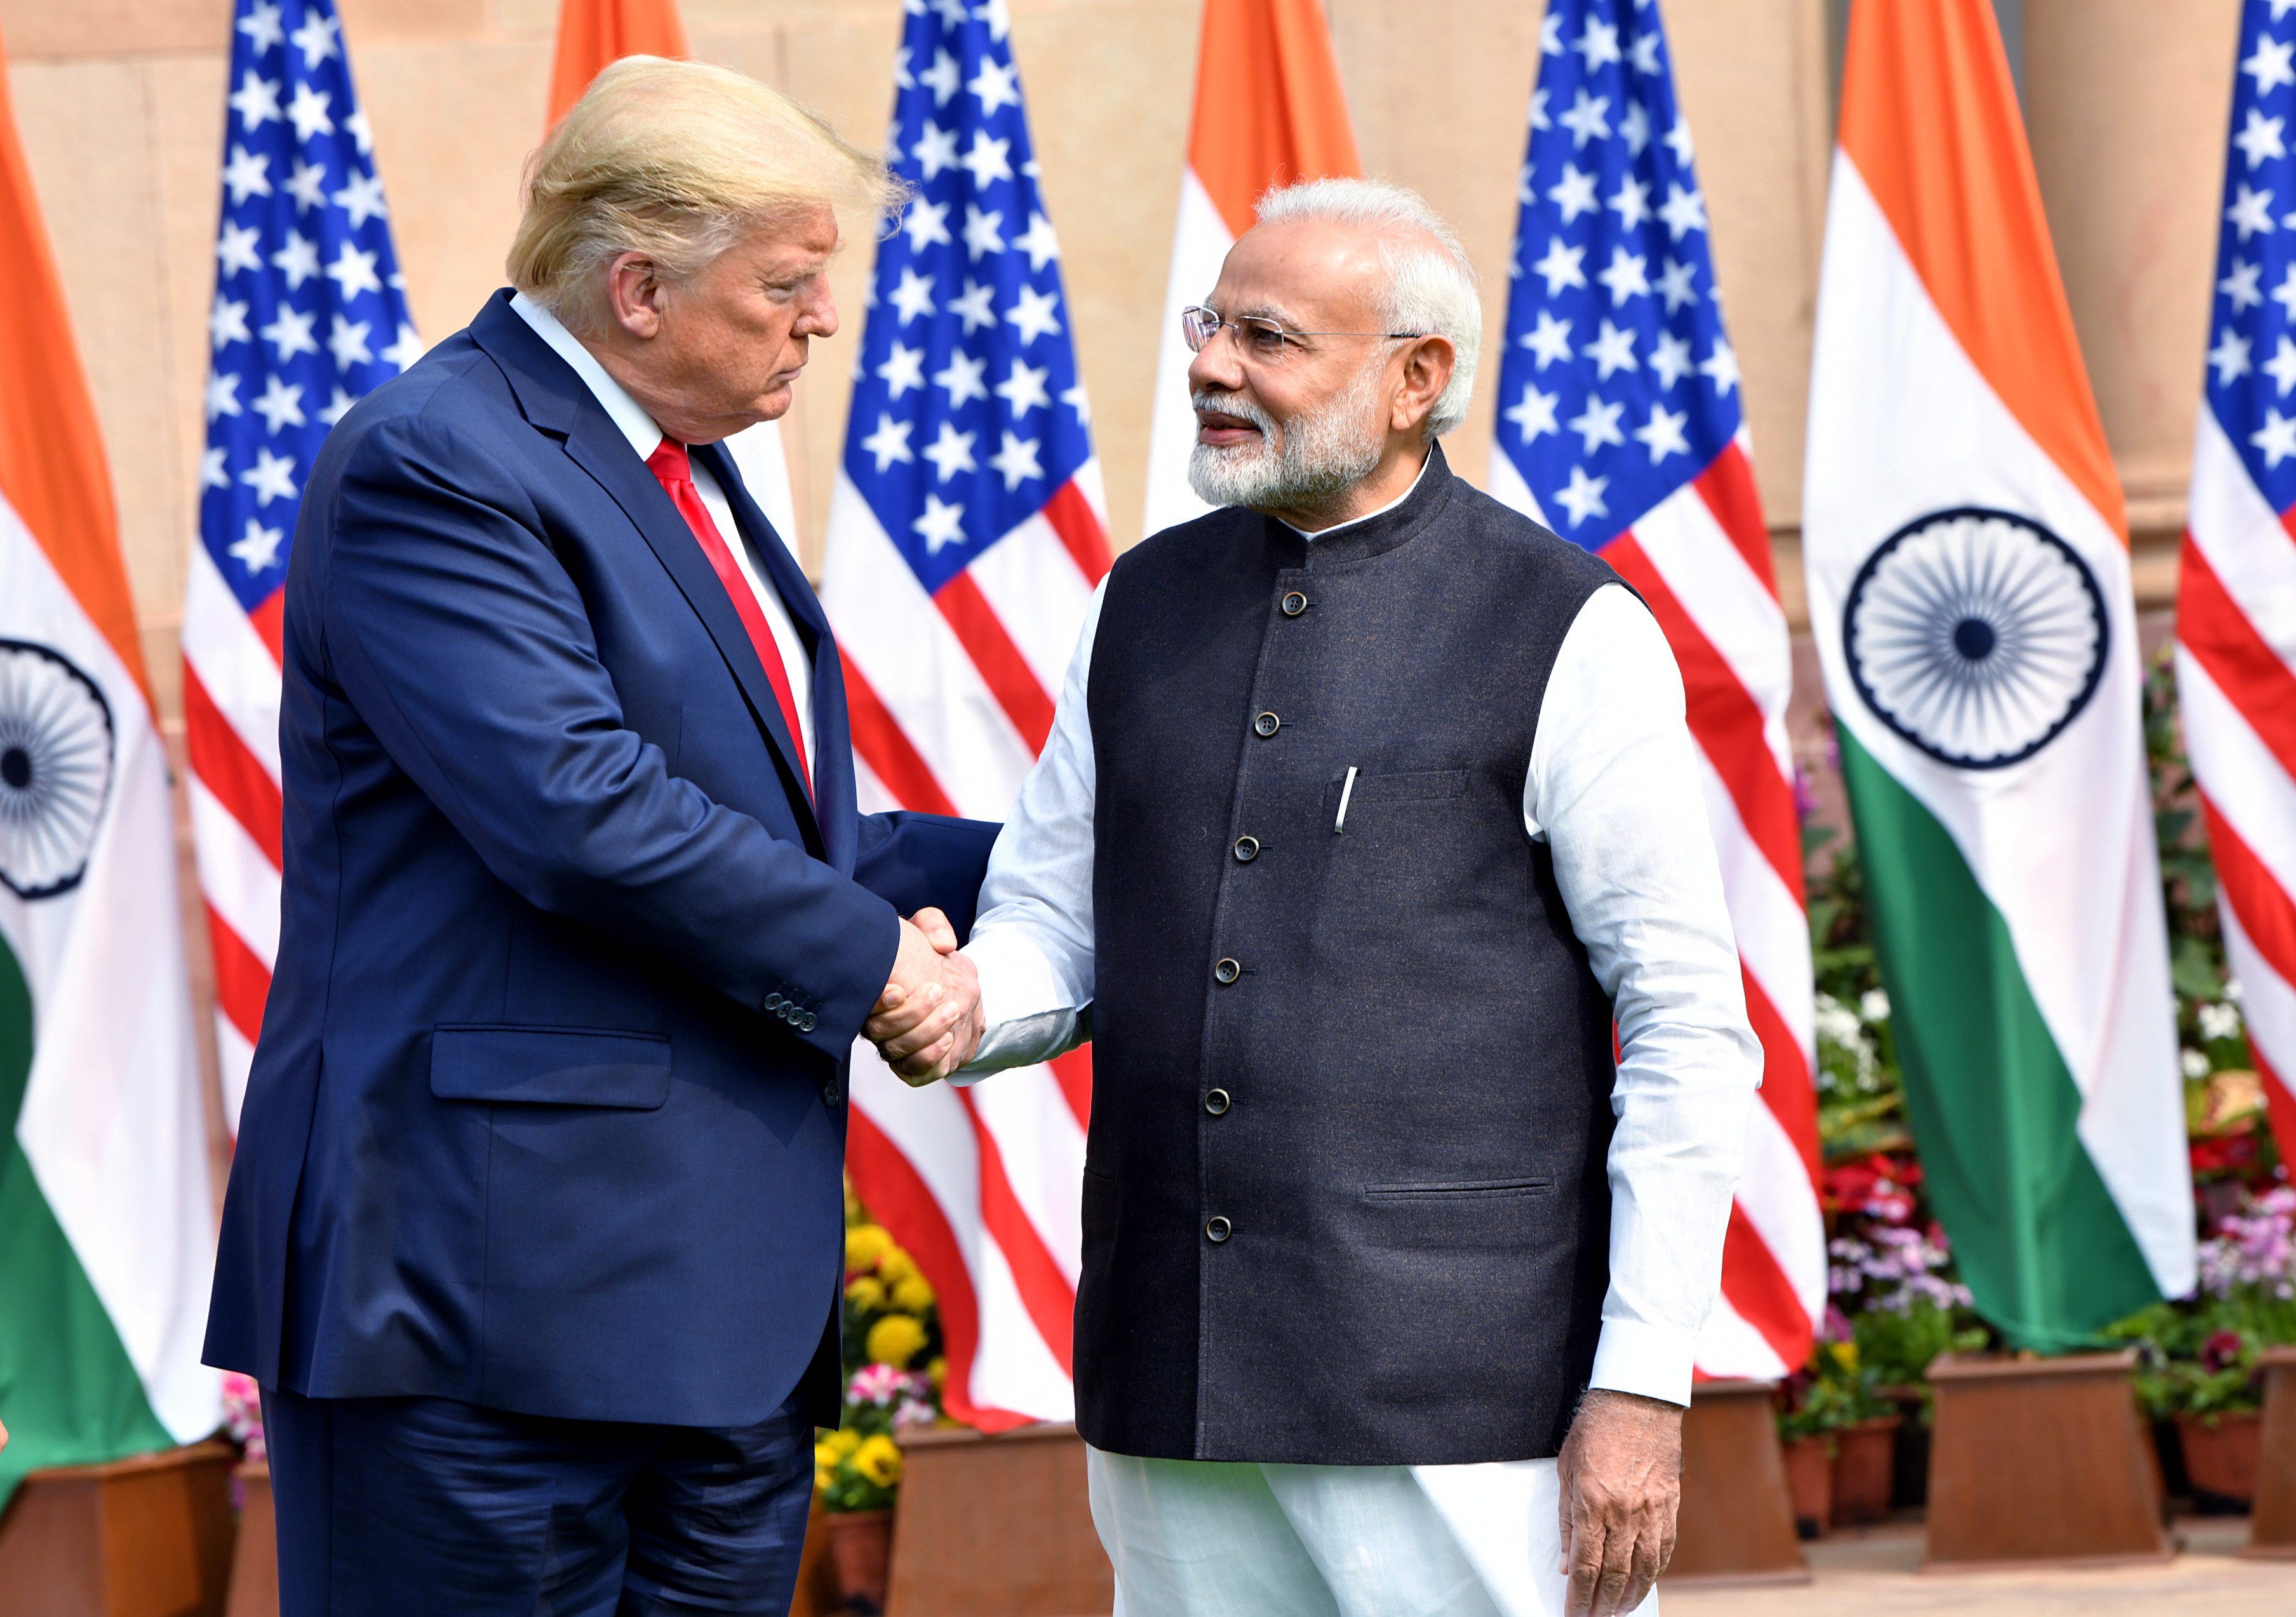 India, US expanded defence cooperation with USD 3 billion military equipment deals: Trump